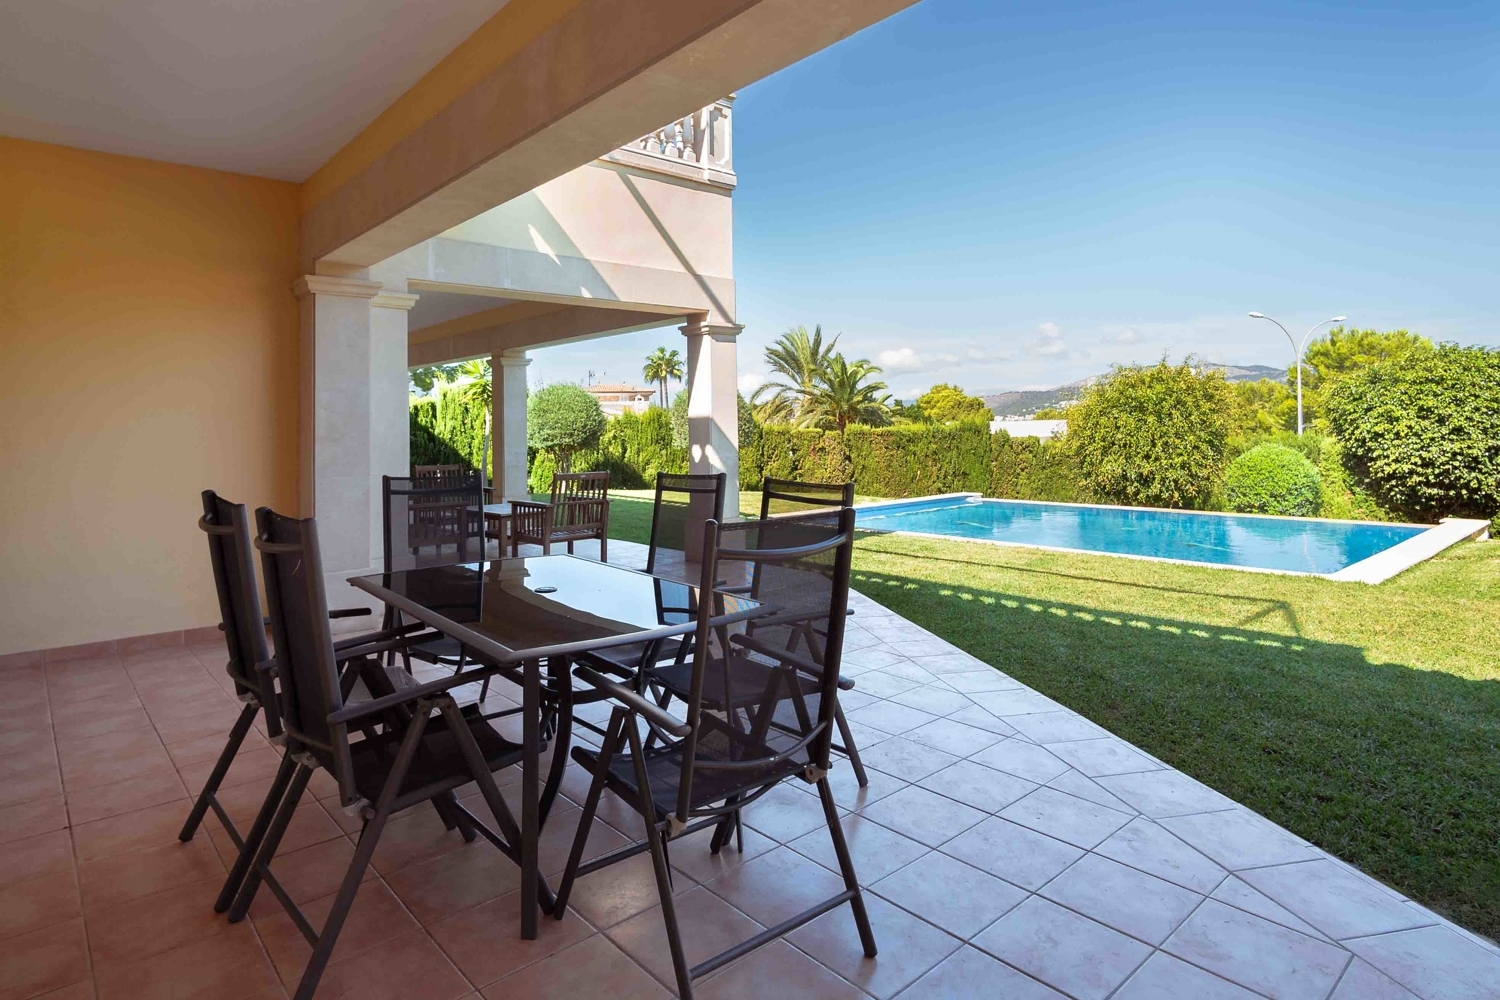 Charming VILLA wiith Infinity Pool and SEAVIEWS comes with a HOLIDAY RENTAL LICENSE in SANTA PONSA